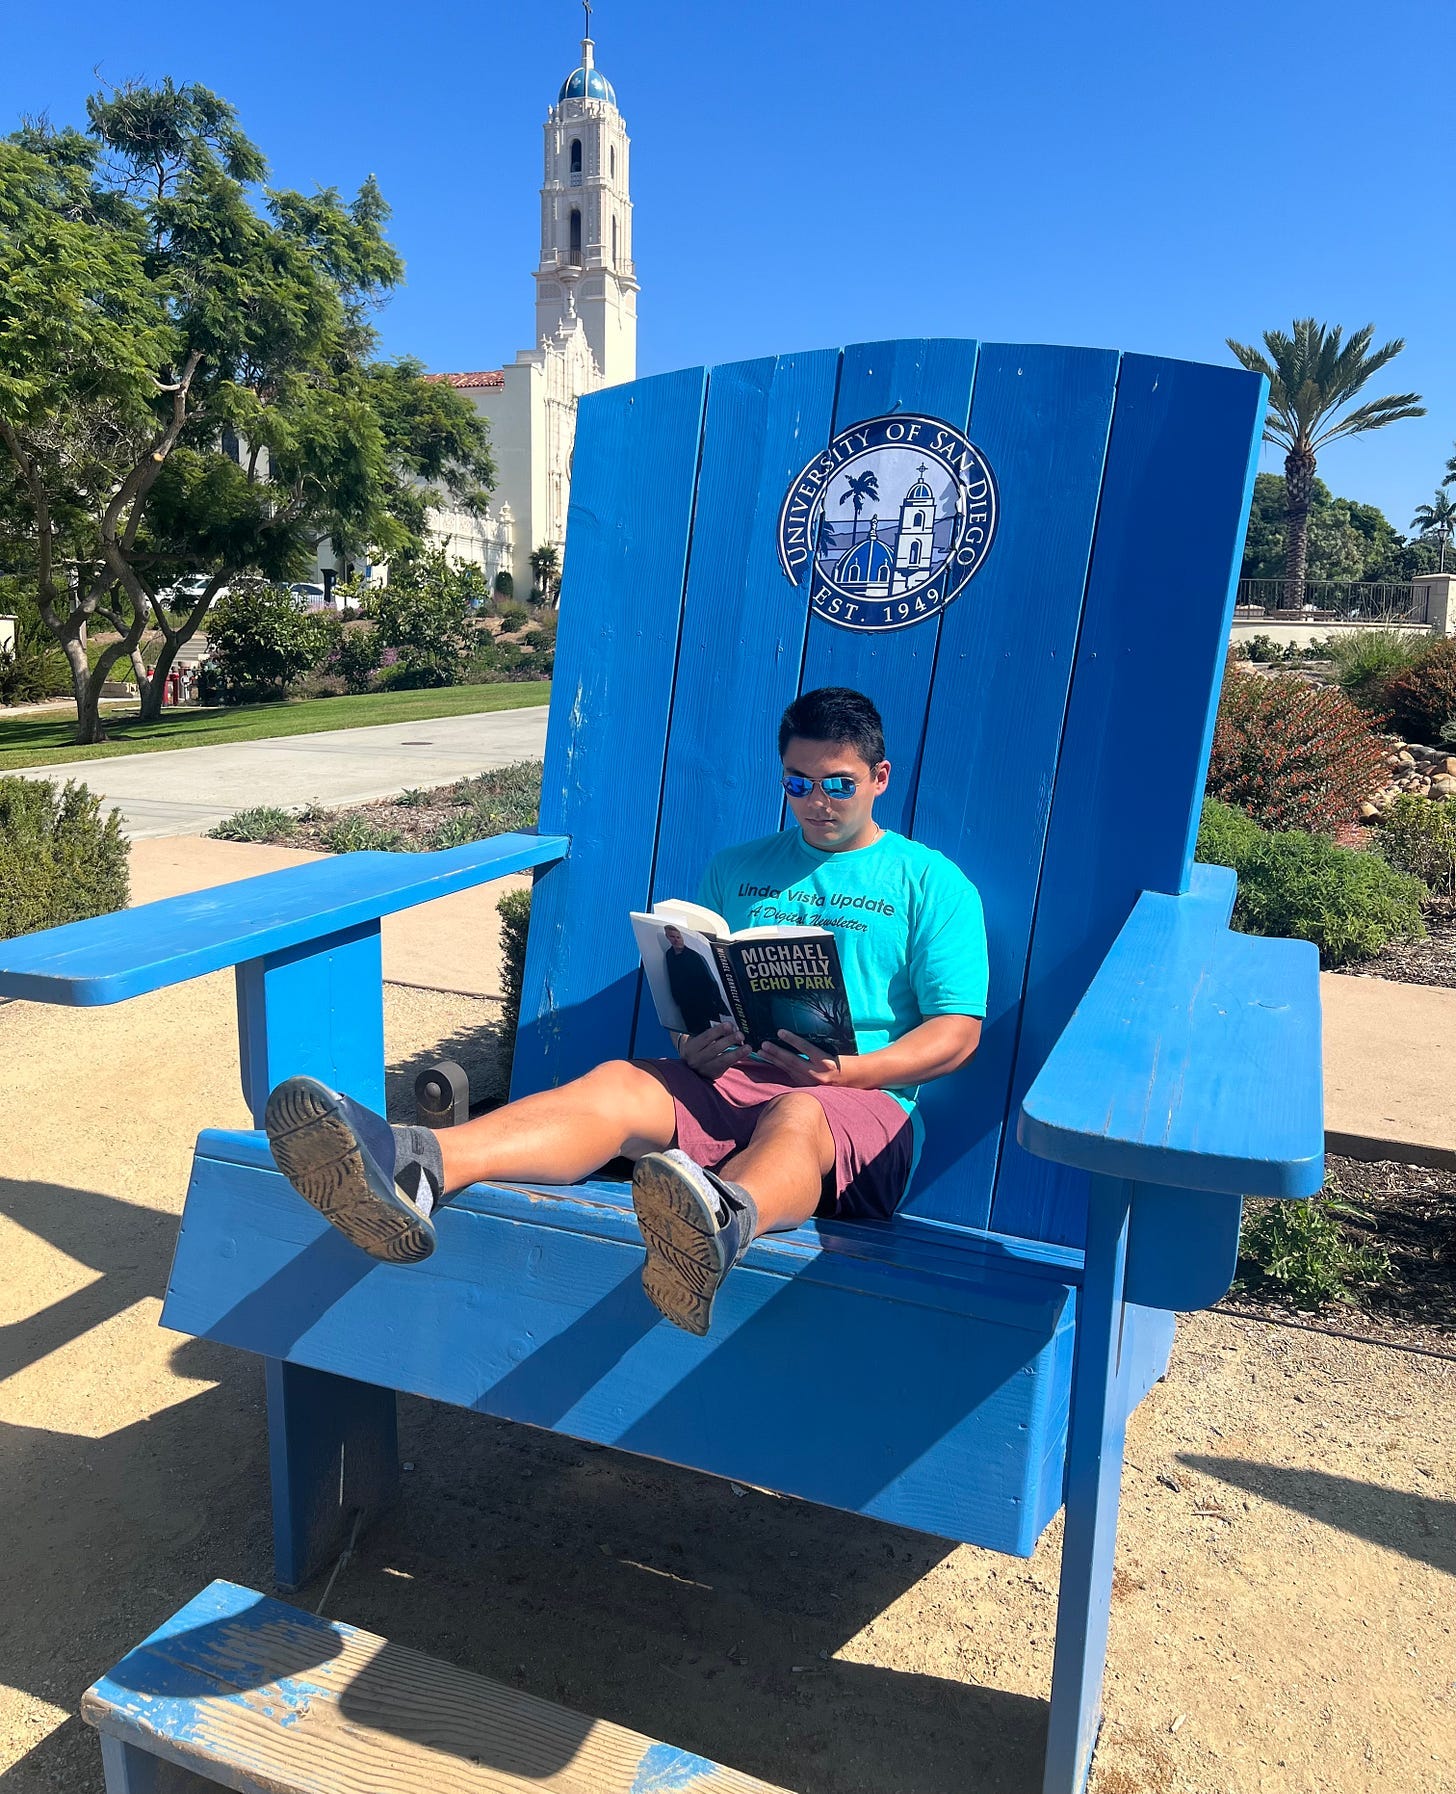 A person sitting in a large blue chair

Description automatically generated